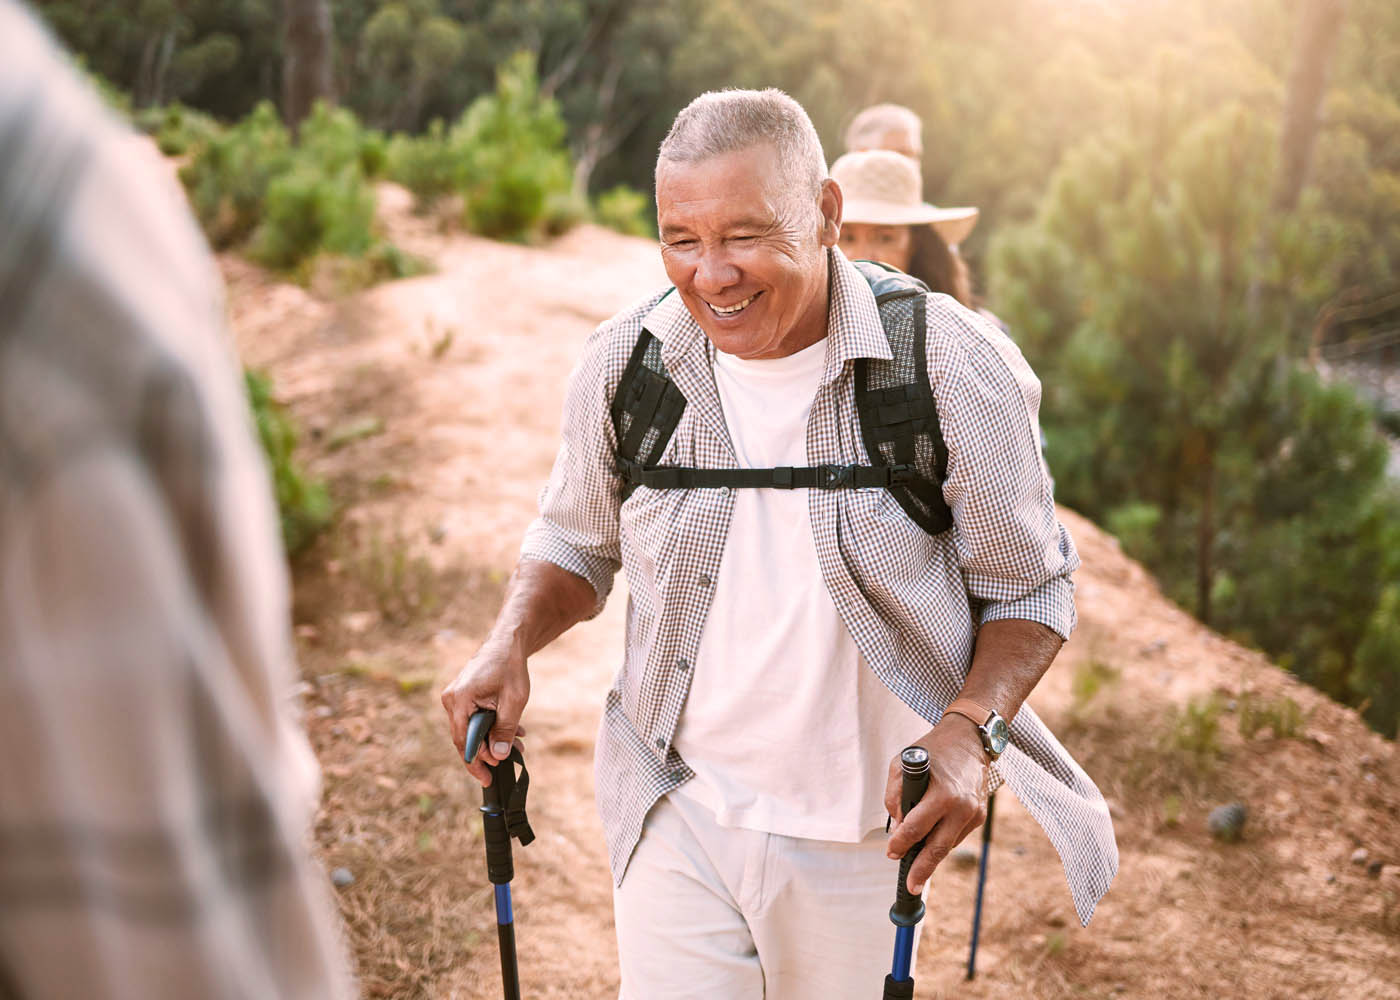 A man hiking with his wife free of pain after visiting Light Lounge's chronic pain treatment center in Scottsdale, AZ.